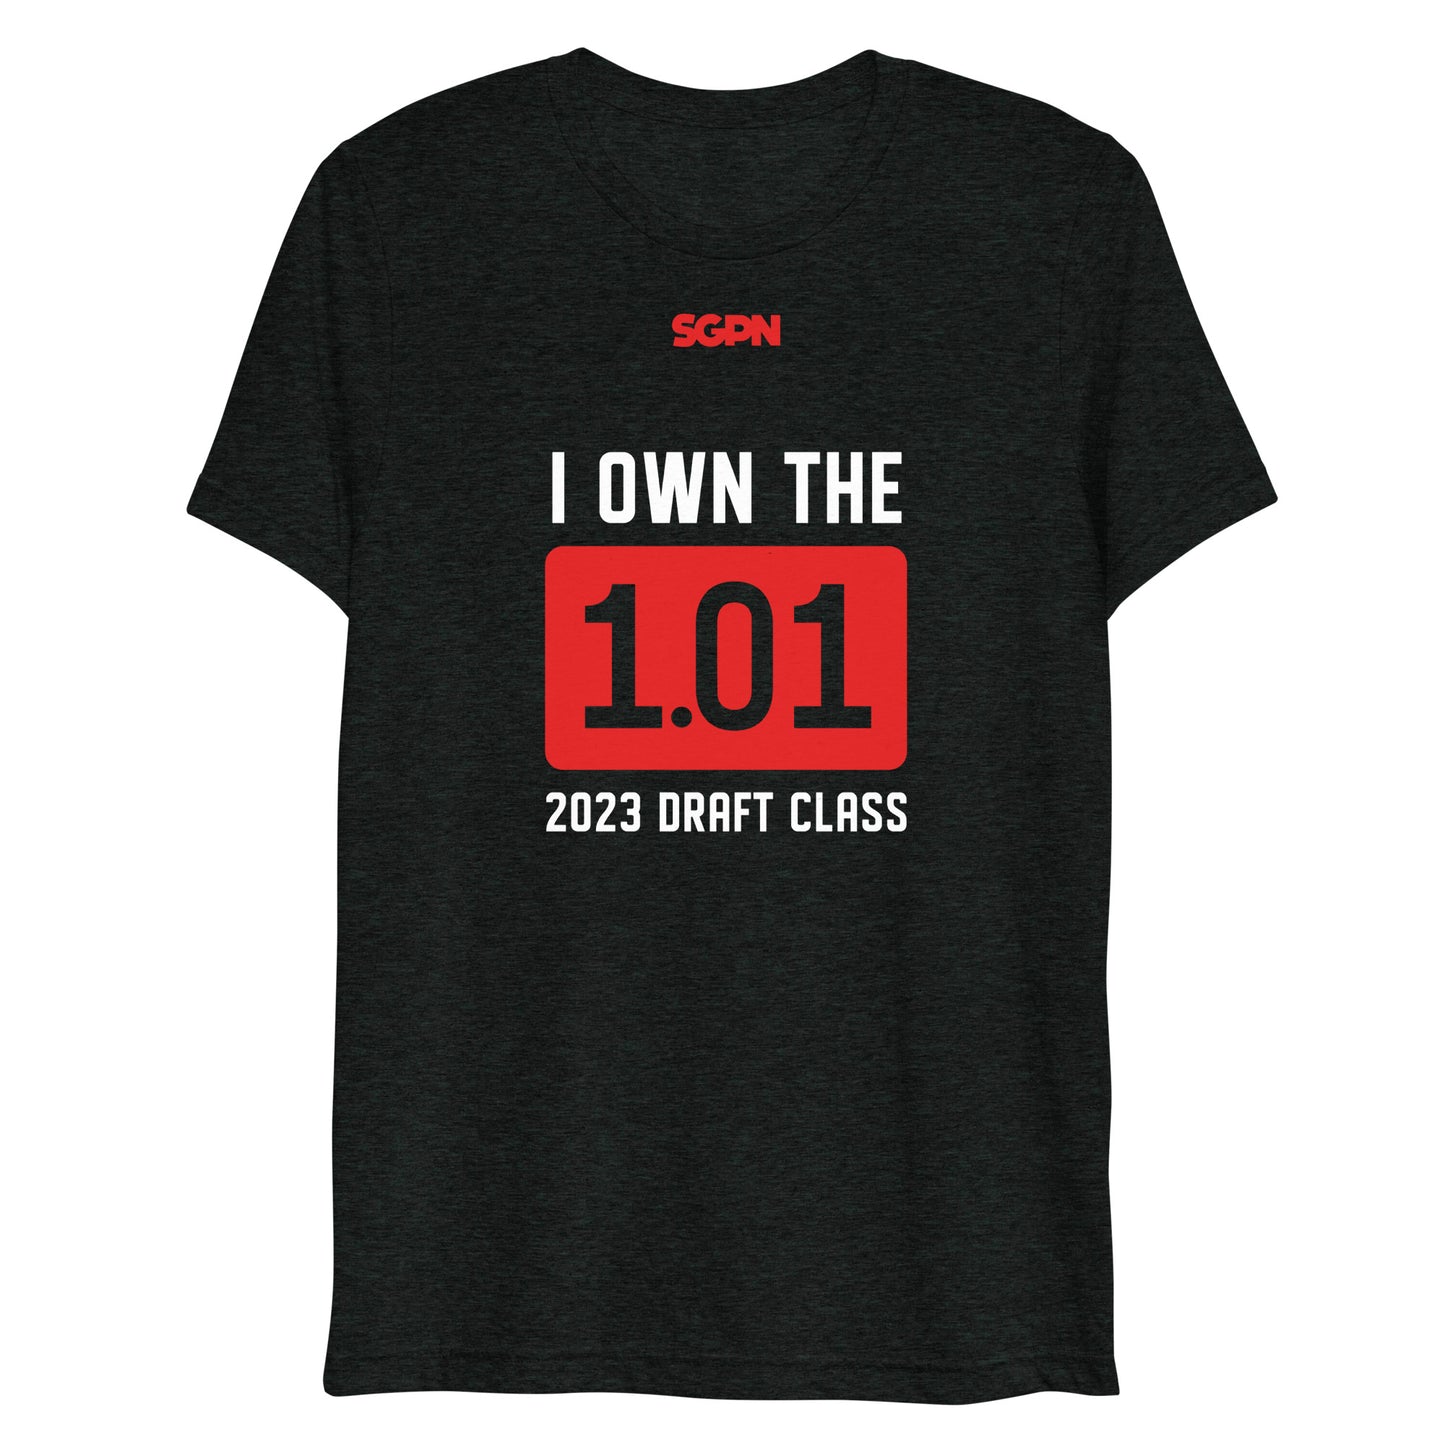 I own the 1.01 - Fantasy Football Podcast- Short sleeve t-shirt (Red)